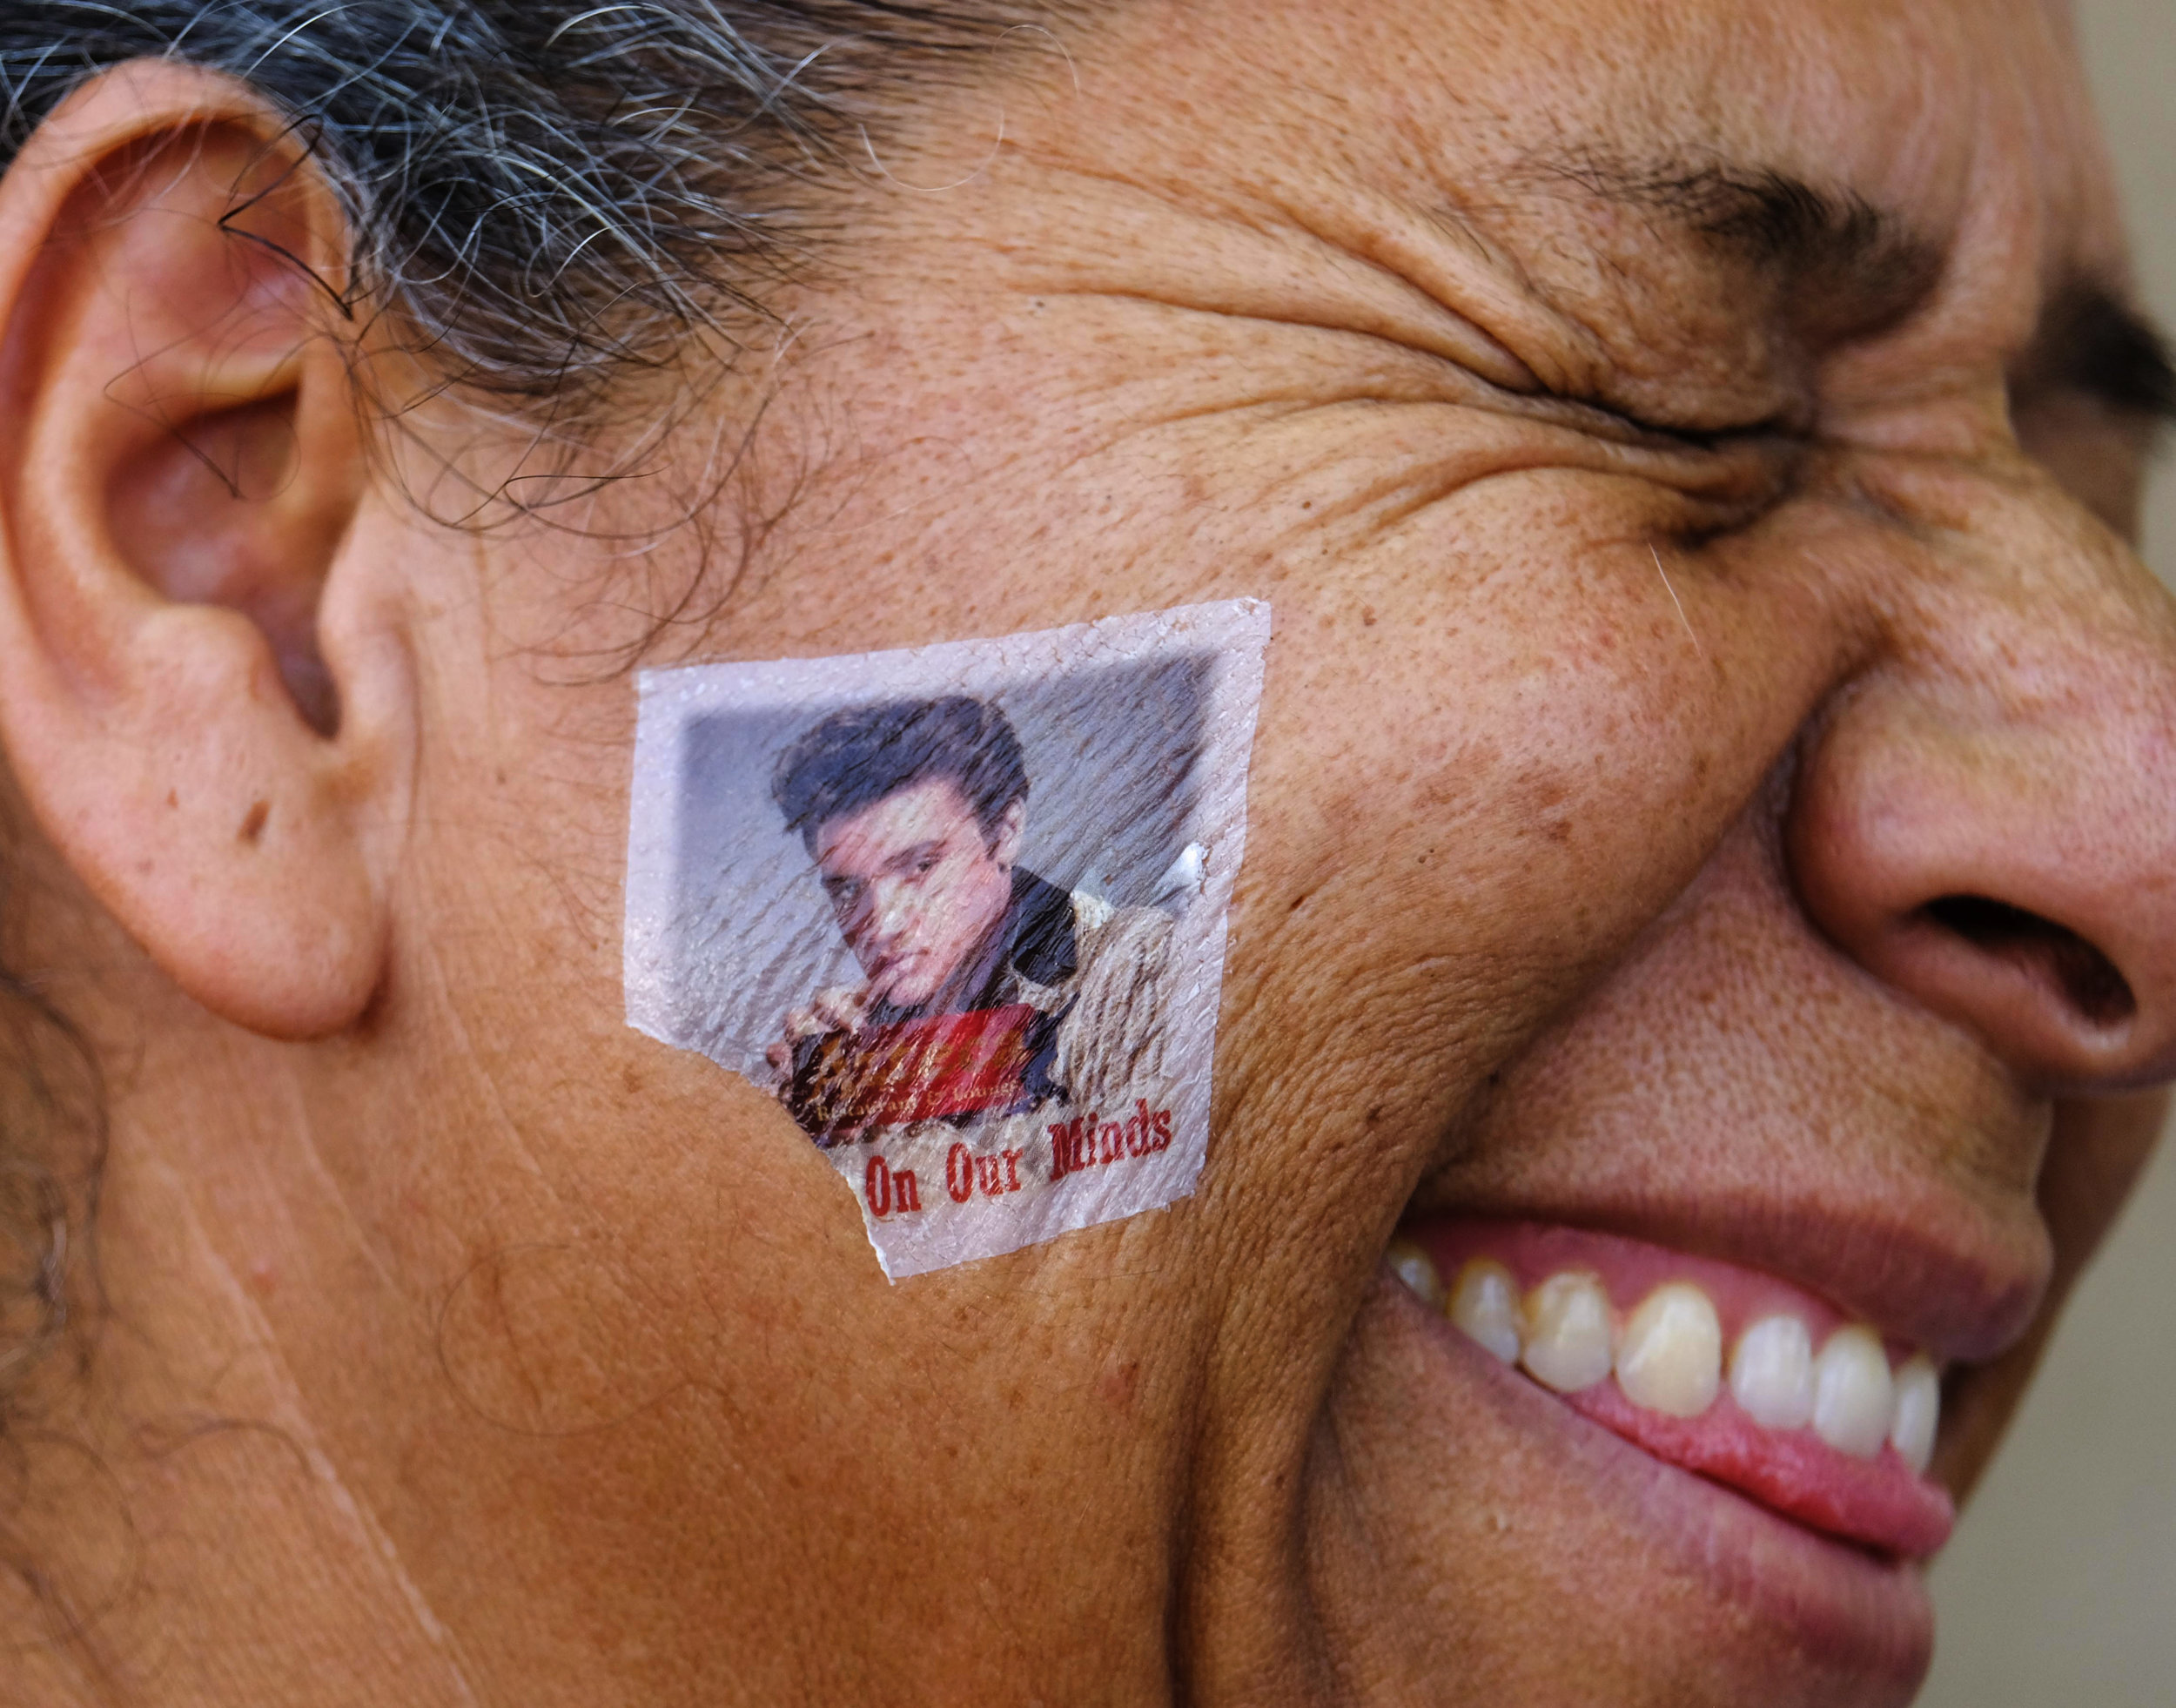  An Elvis Presley's fan with painted face participates in the 19th annual Elvis Festival to tribute the King of Rock N' Roll on Sunday August 26, 2018 in Garden Grove, California, the United States. 